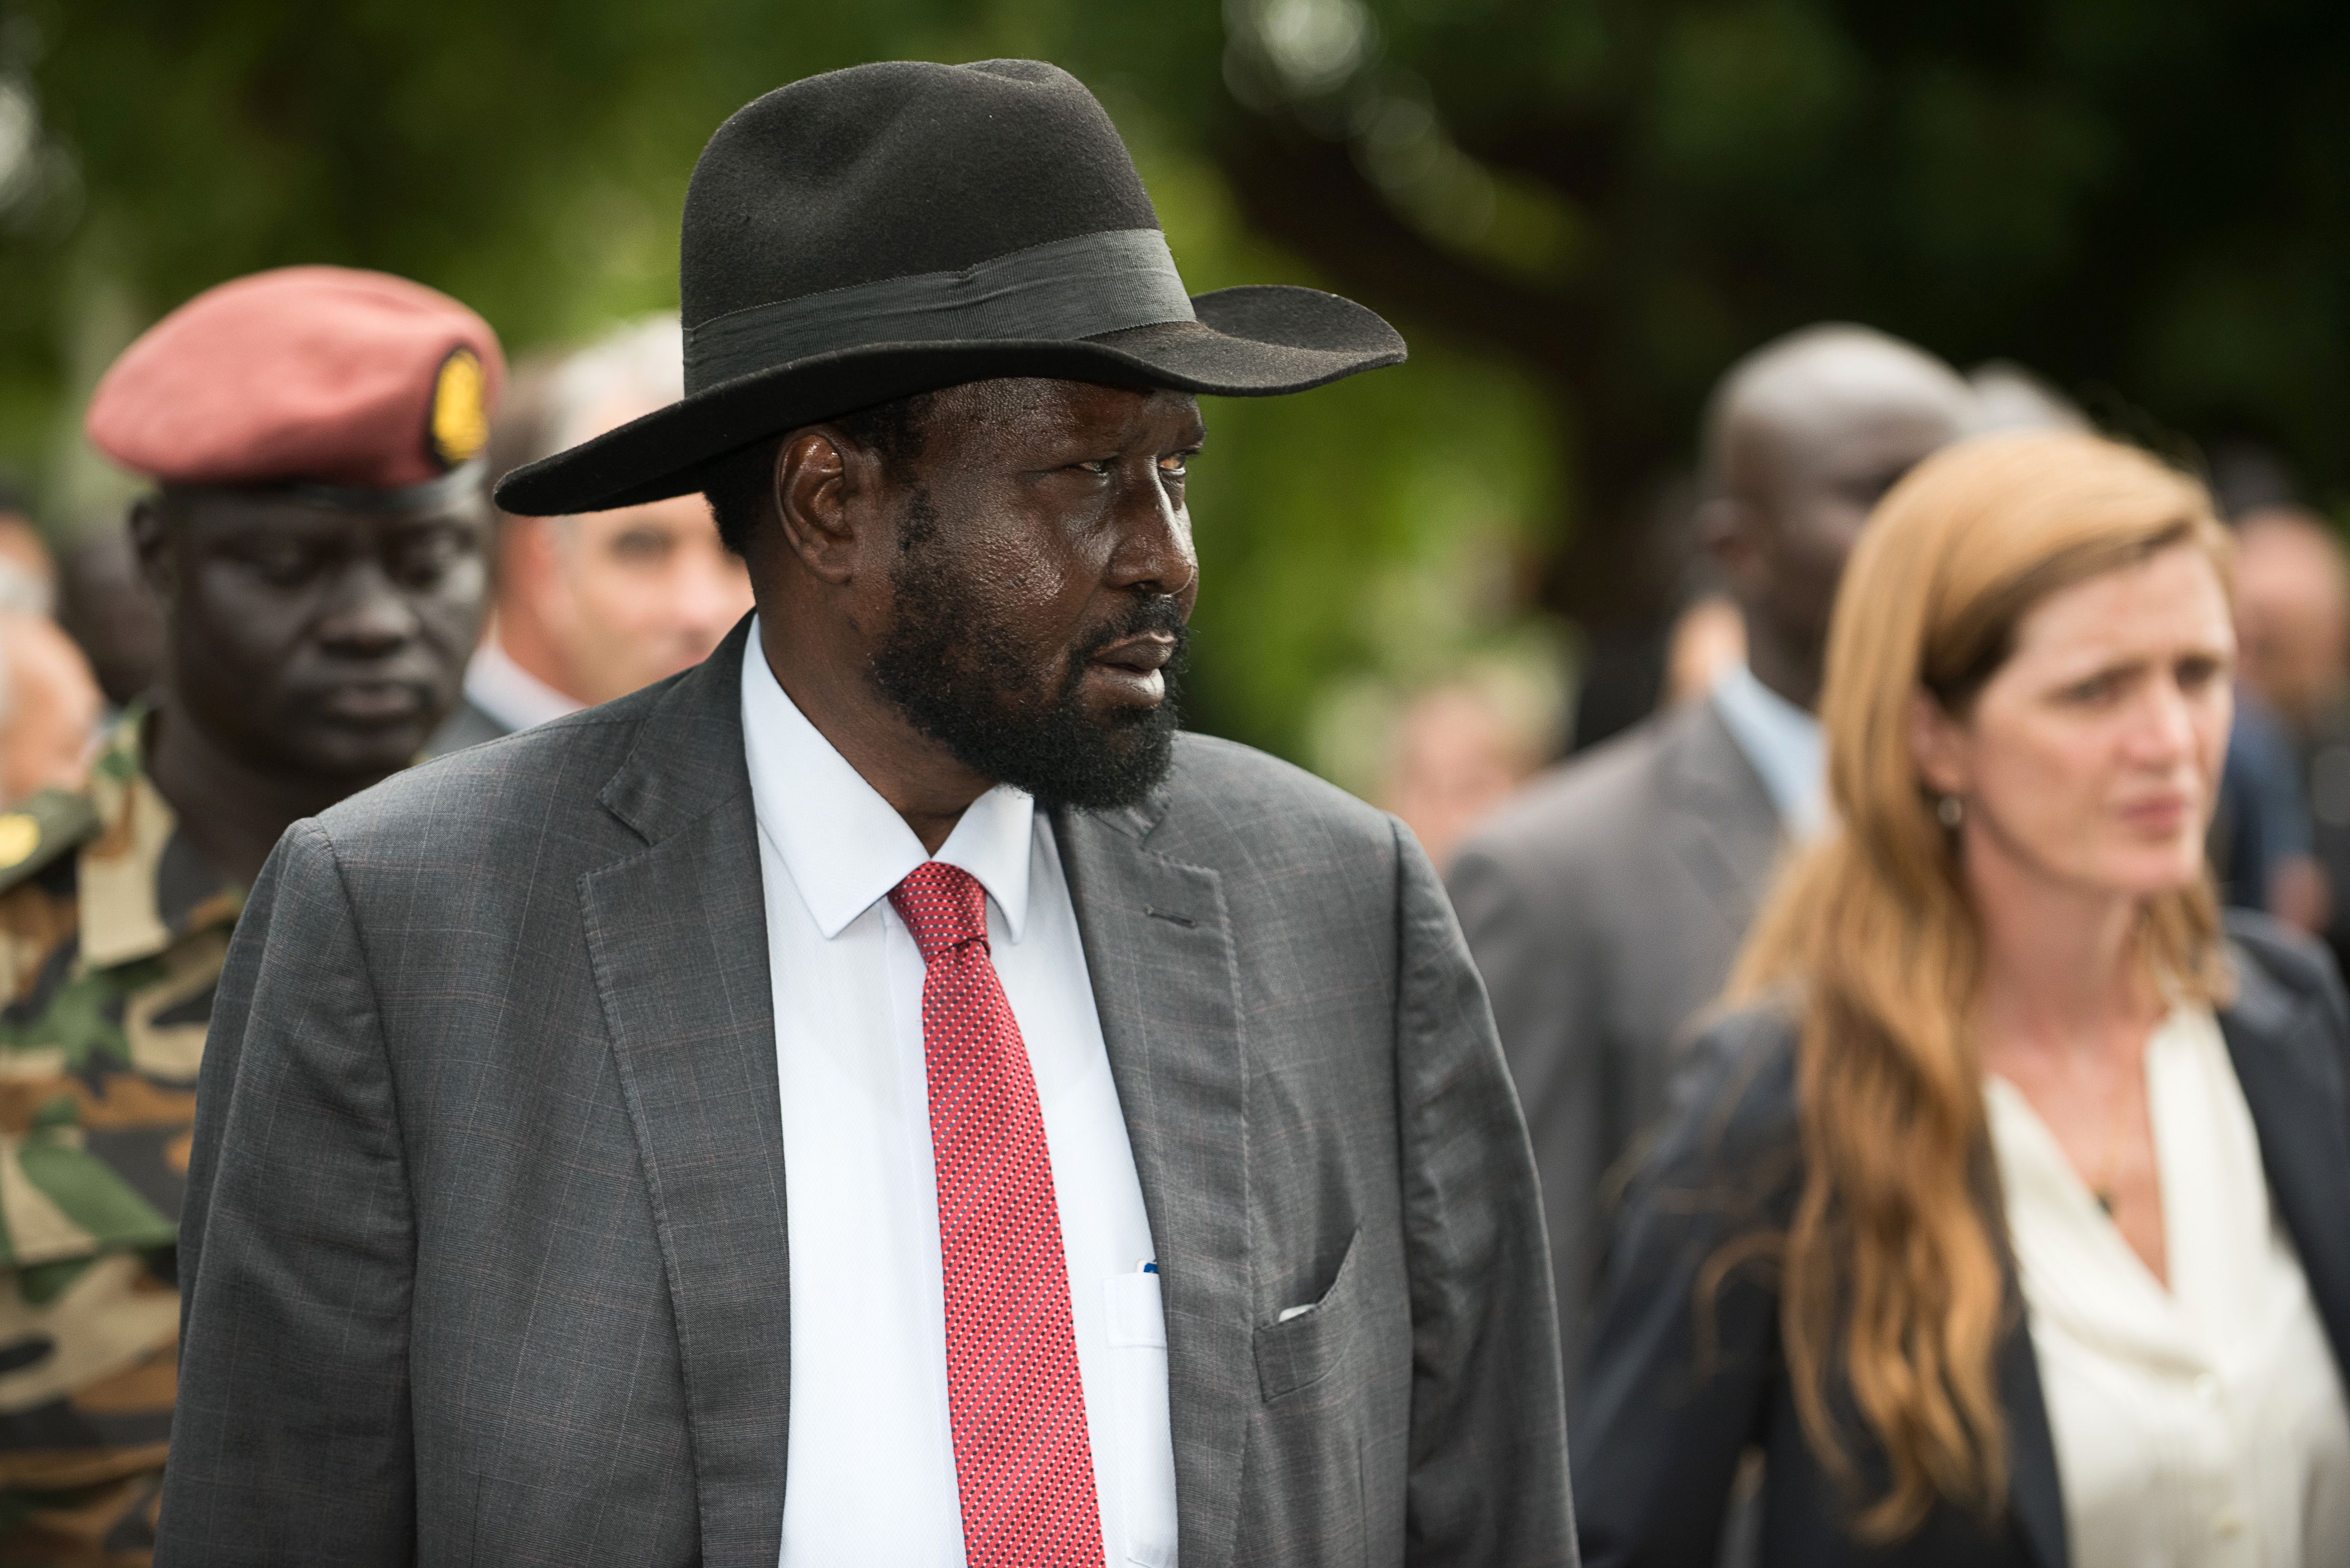 South Sudan's President Salva Kiir during a tour of South Sudan's state house, Sept. 4, 2016. (Charles Atiki Lomodong—AFP/Getty Images)